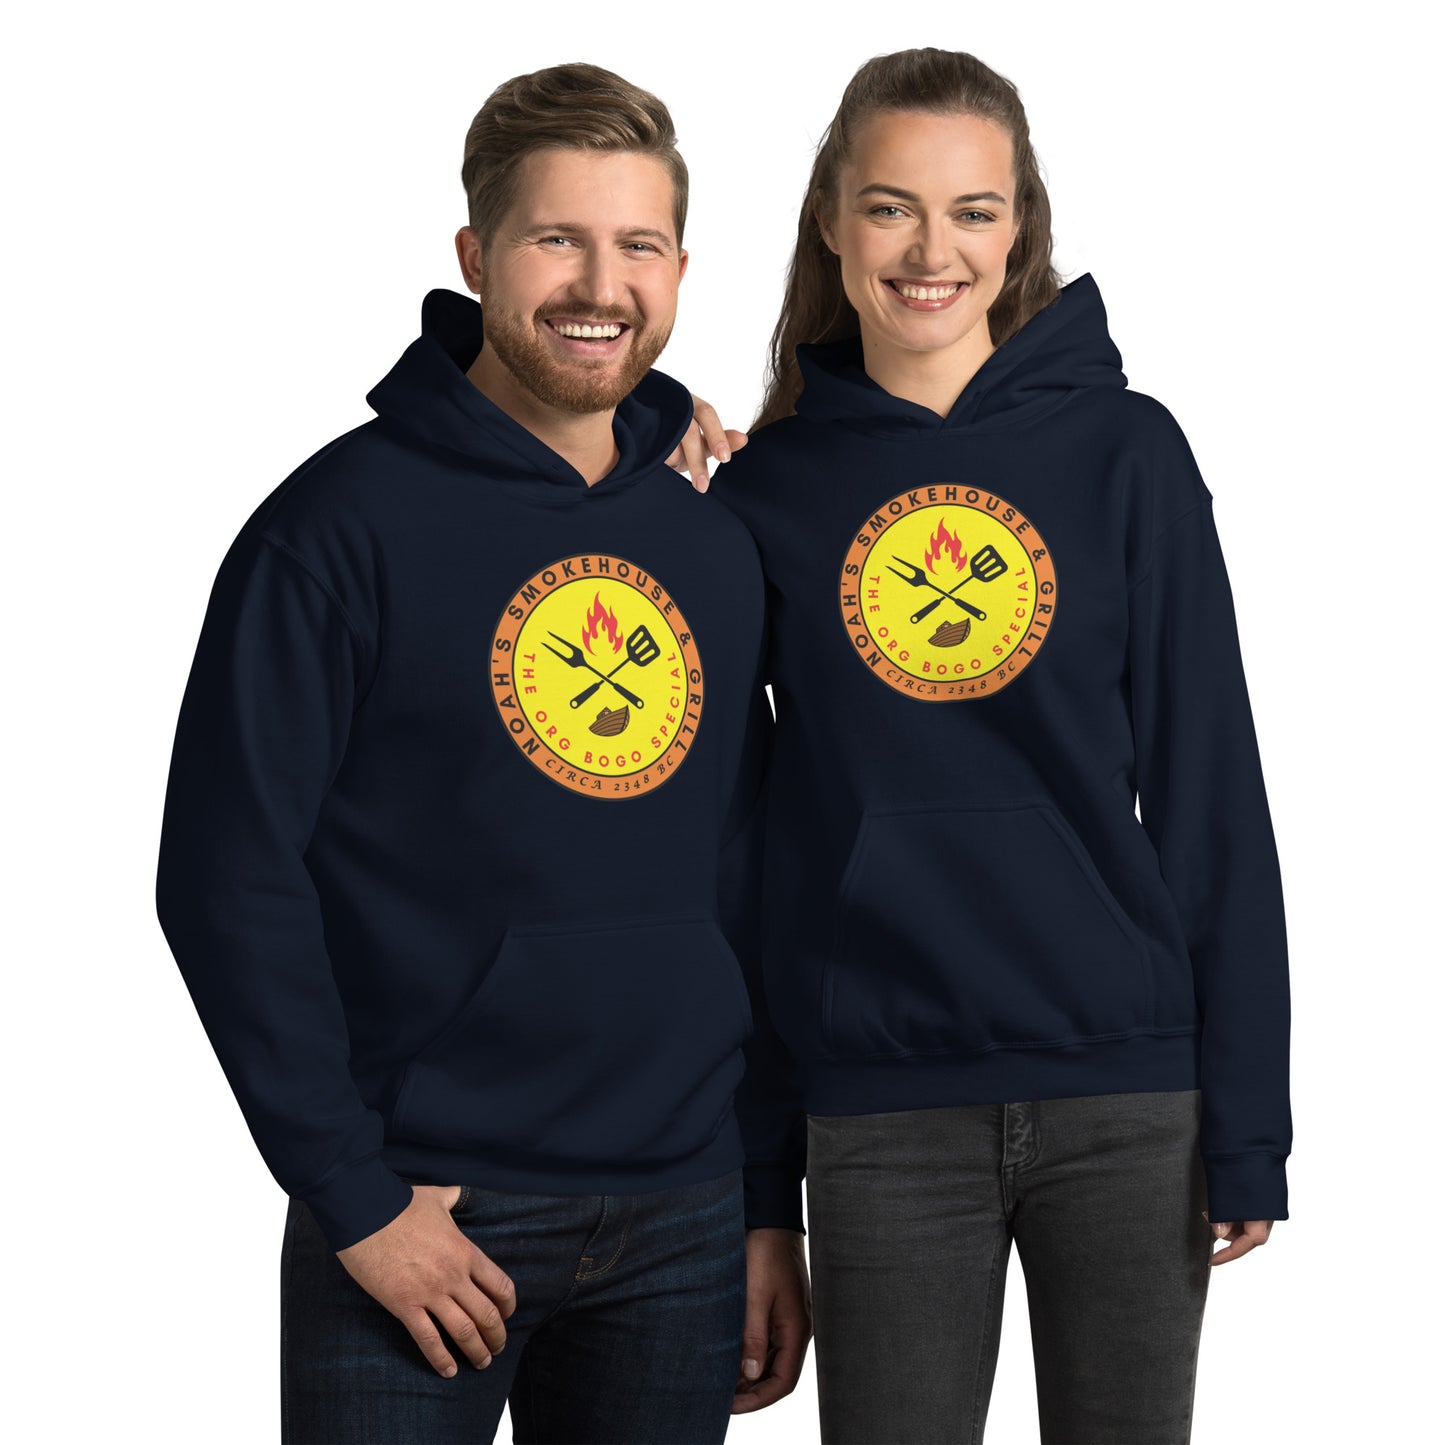 Noah's Smokehouse & Grill - The Org BOGO Special Circa 2348 BC Unisex Hoodie